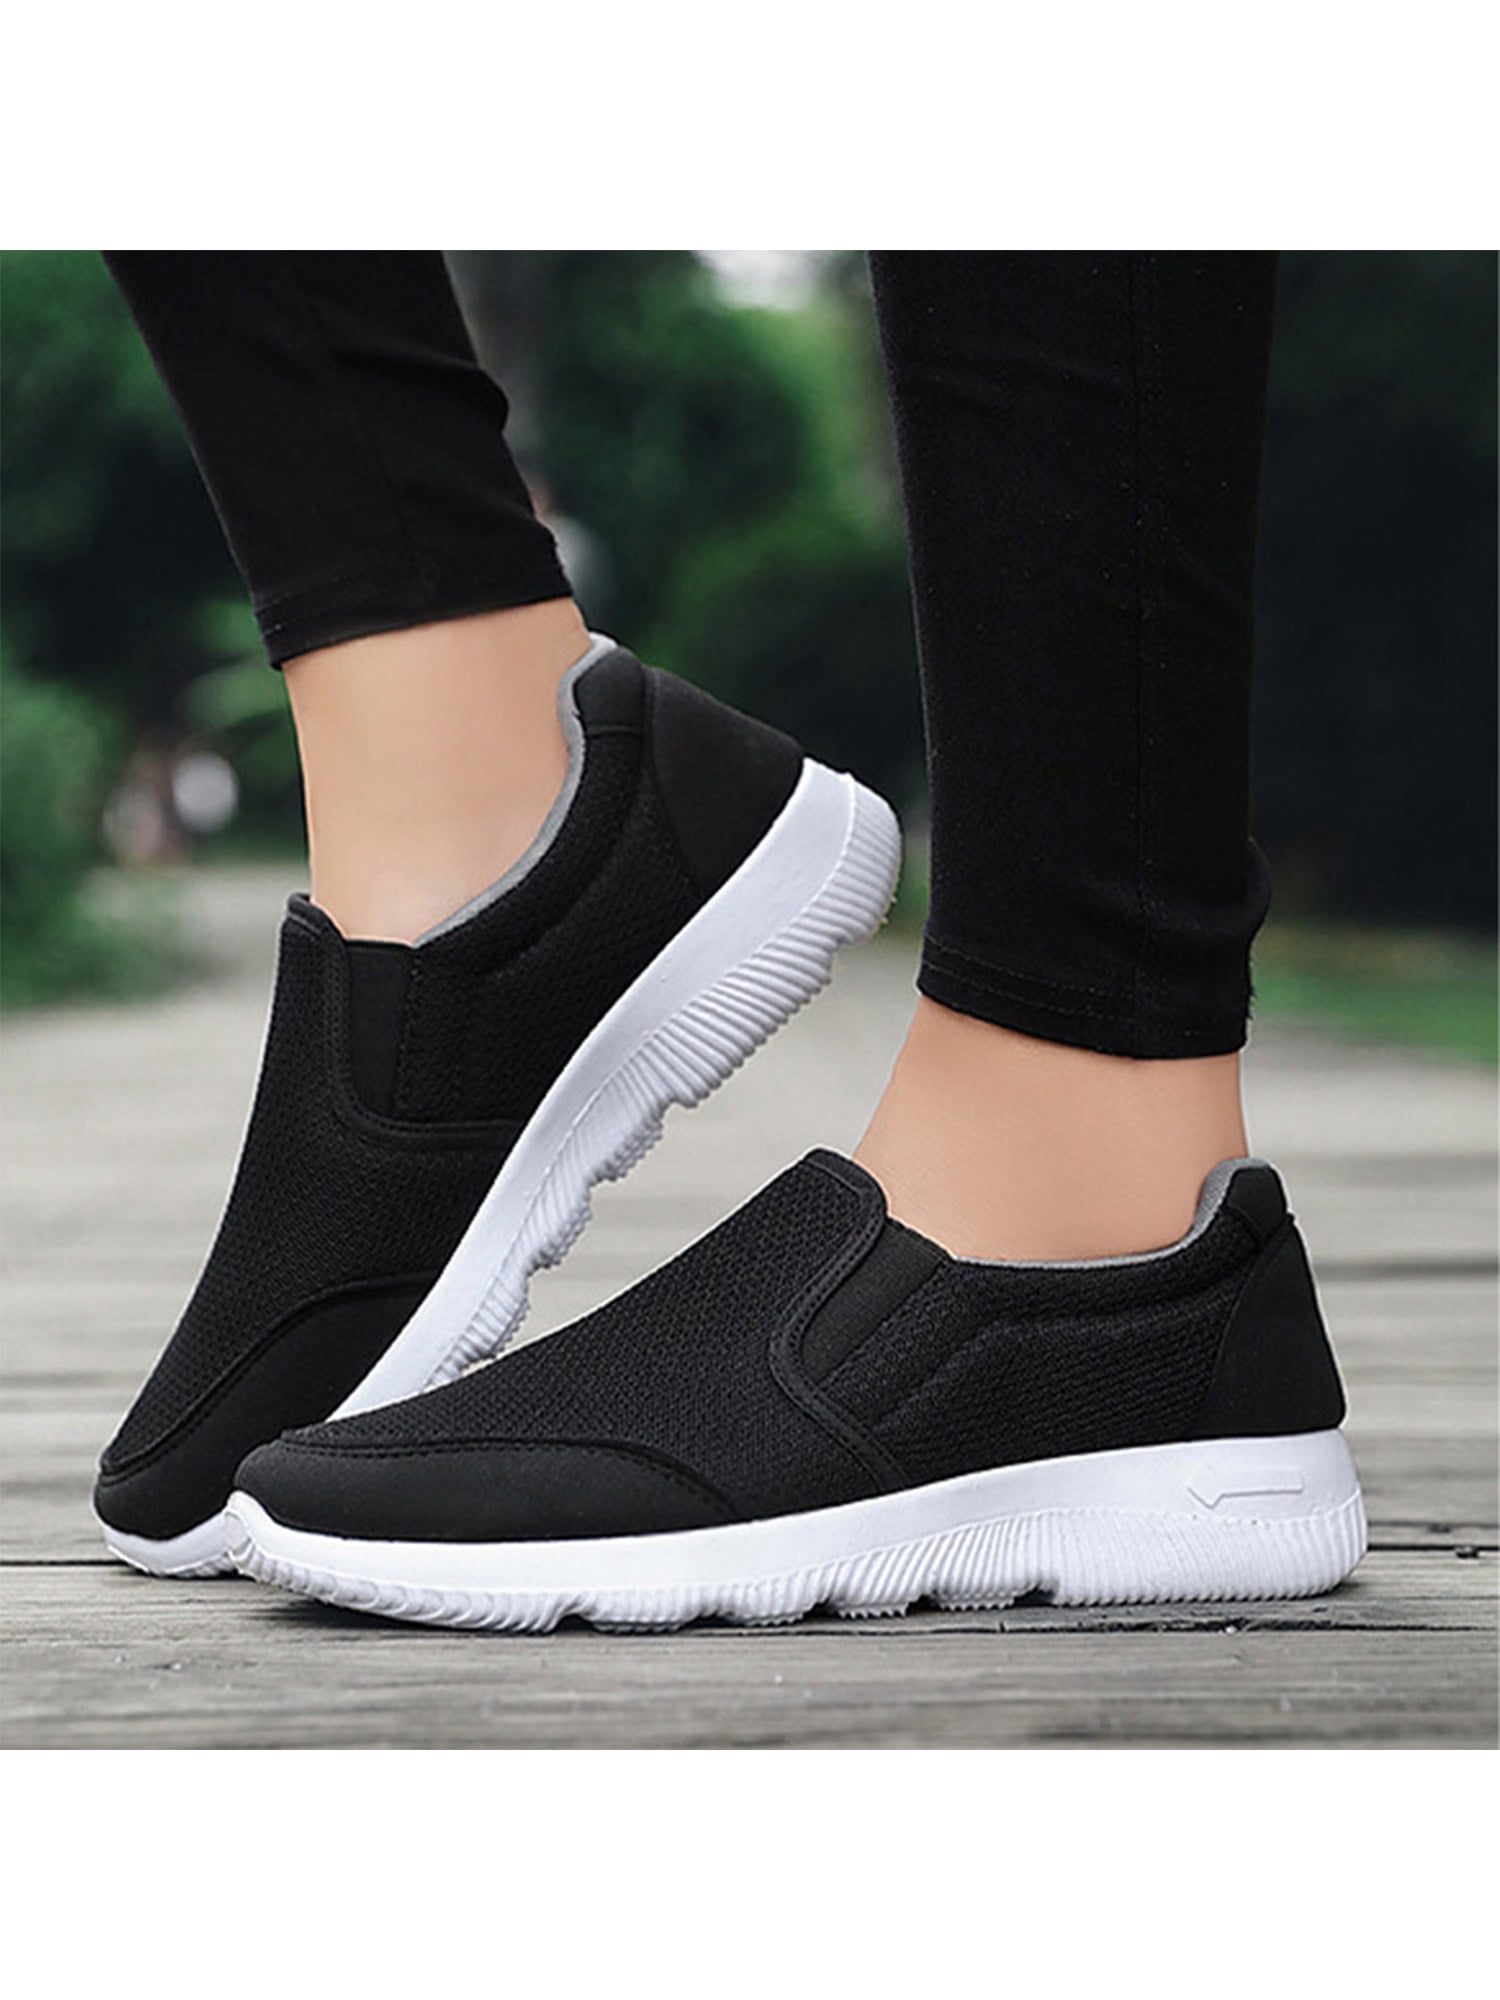 RAINED-Womens Sneakers Casual Walking Athletic Shoes Lightweight Slip On Sneakers Breathable Mesh Shoes